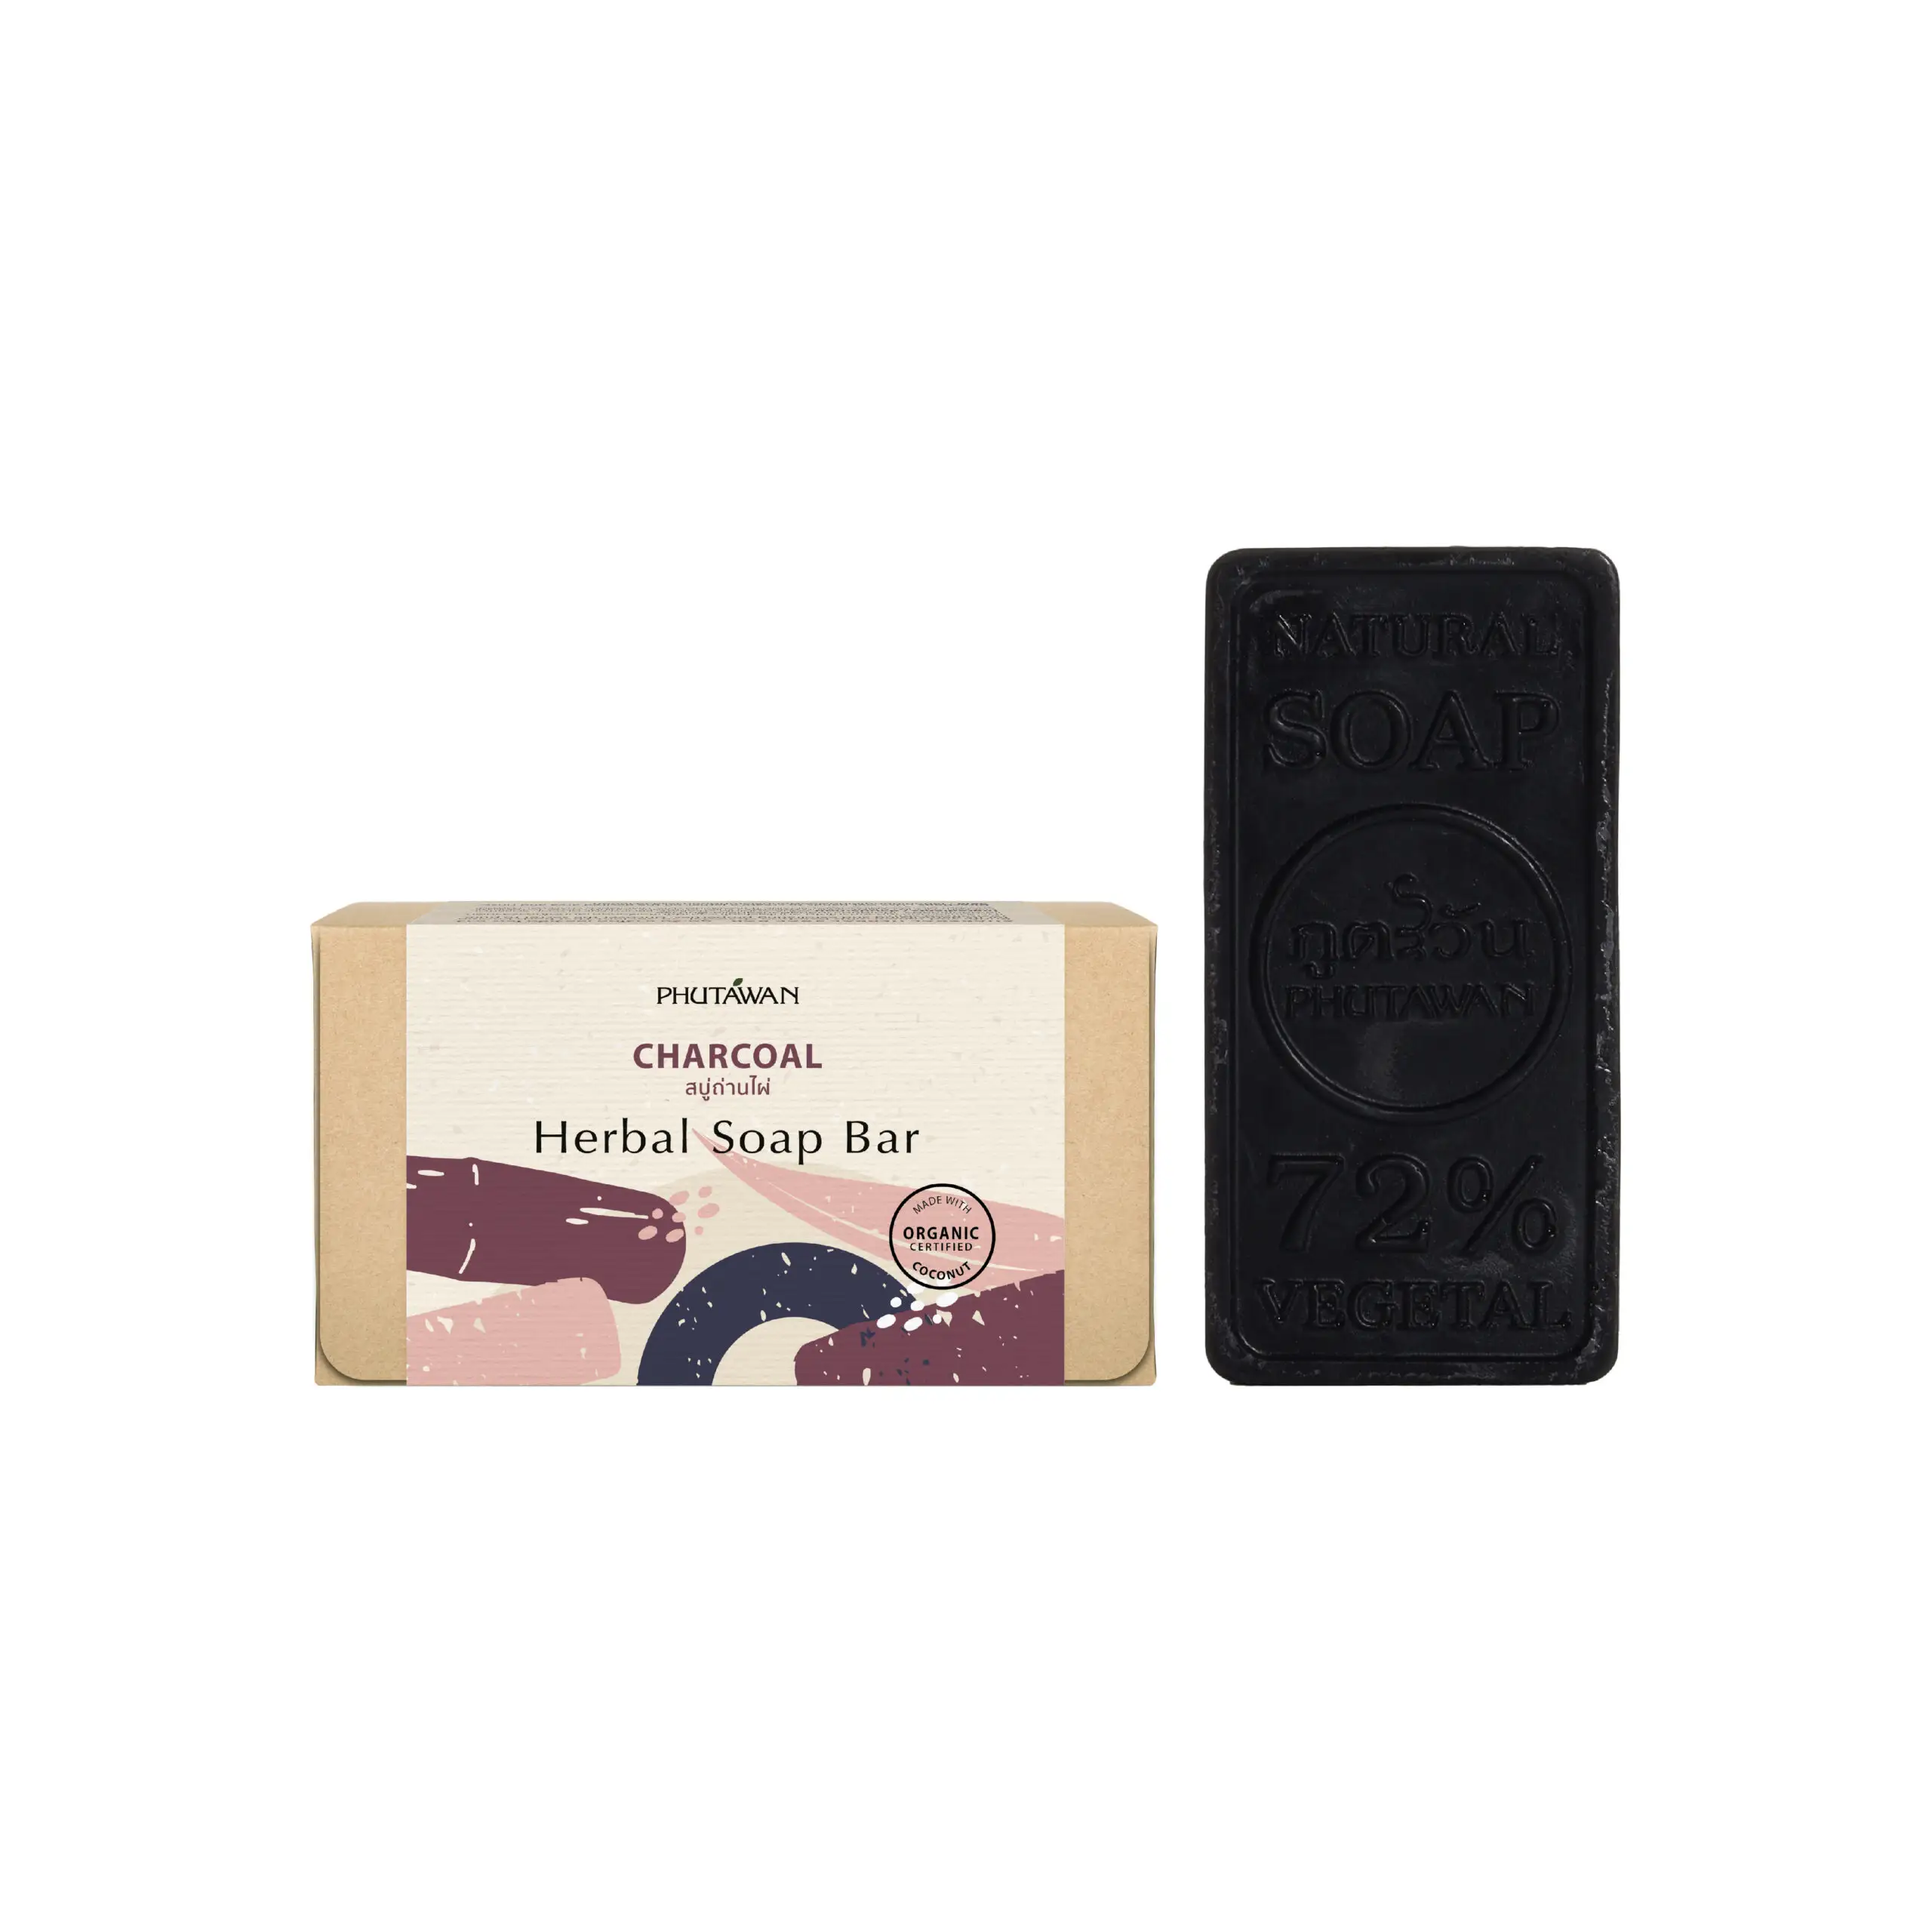 Premium Products Charcoal Herbal Soap Bar From Natural Oils Quality Product From Thailand Thai Herbs Qualified